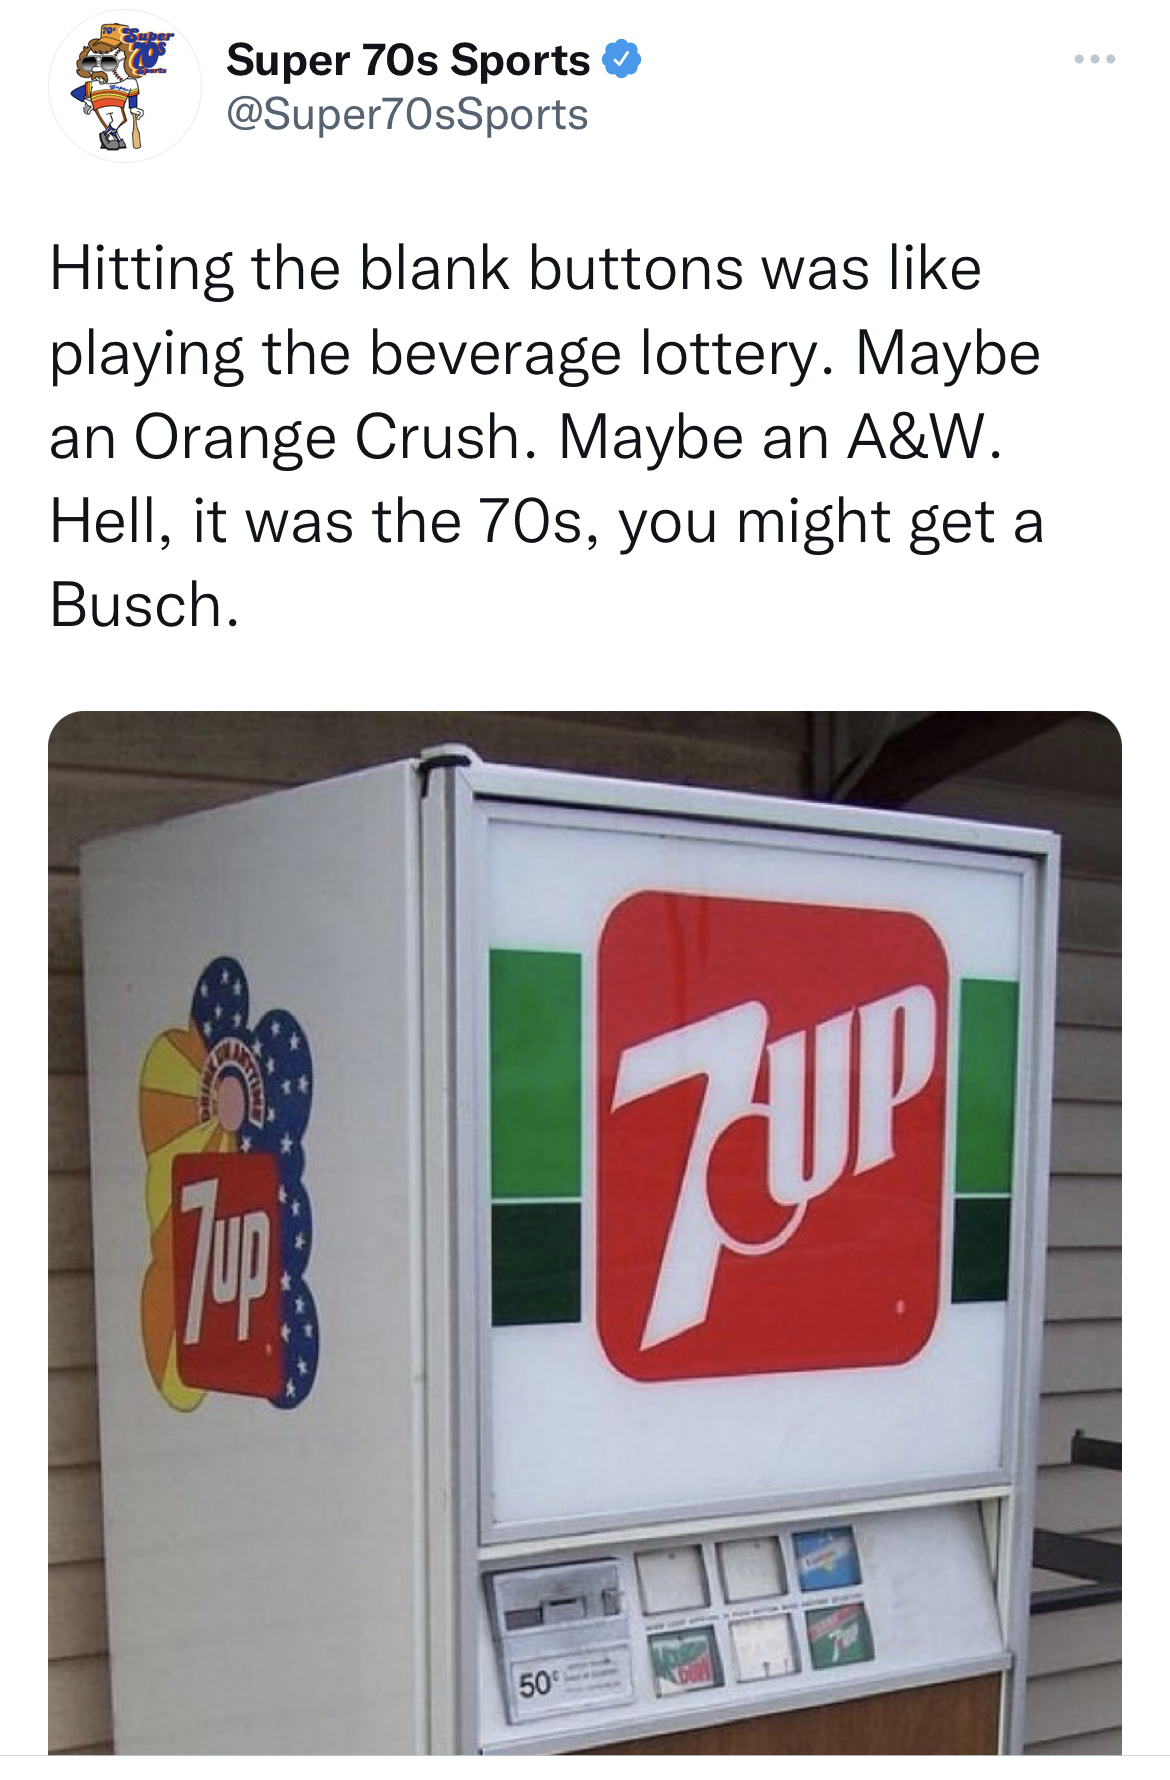 savage tweets - vintage vending machines - Super 70s Sports Hitting the blank buttons was playing the beverage lottery. Maybe an Orange Crush. Maybe an A&W. Hell, it was the 70s, you might get a Busch. 17UP 50